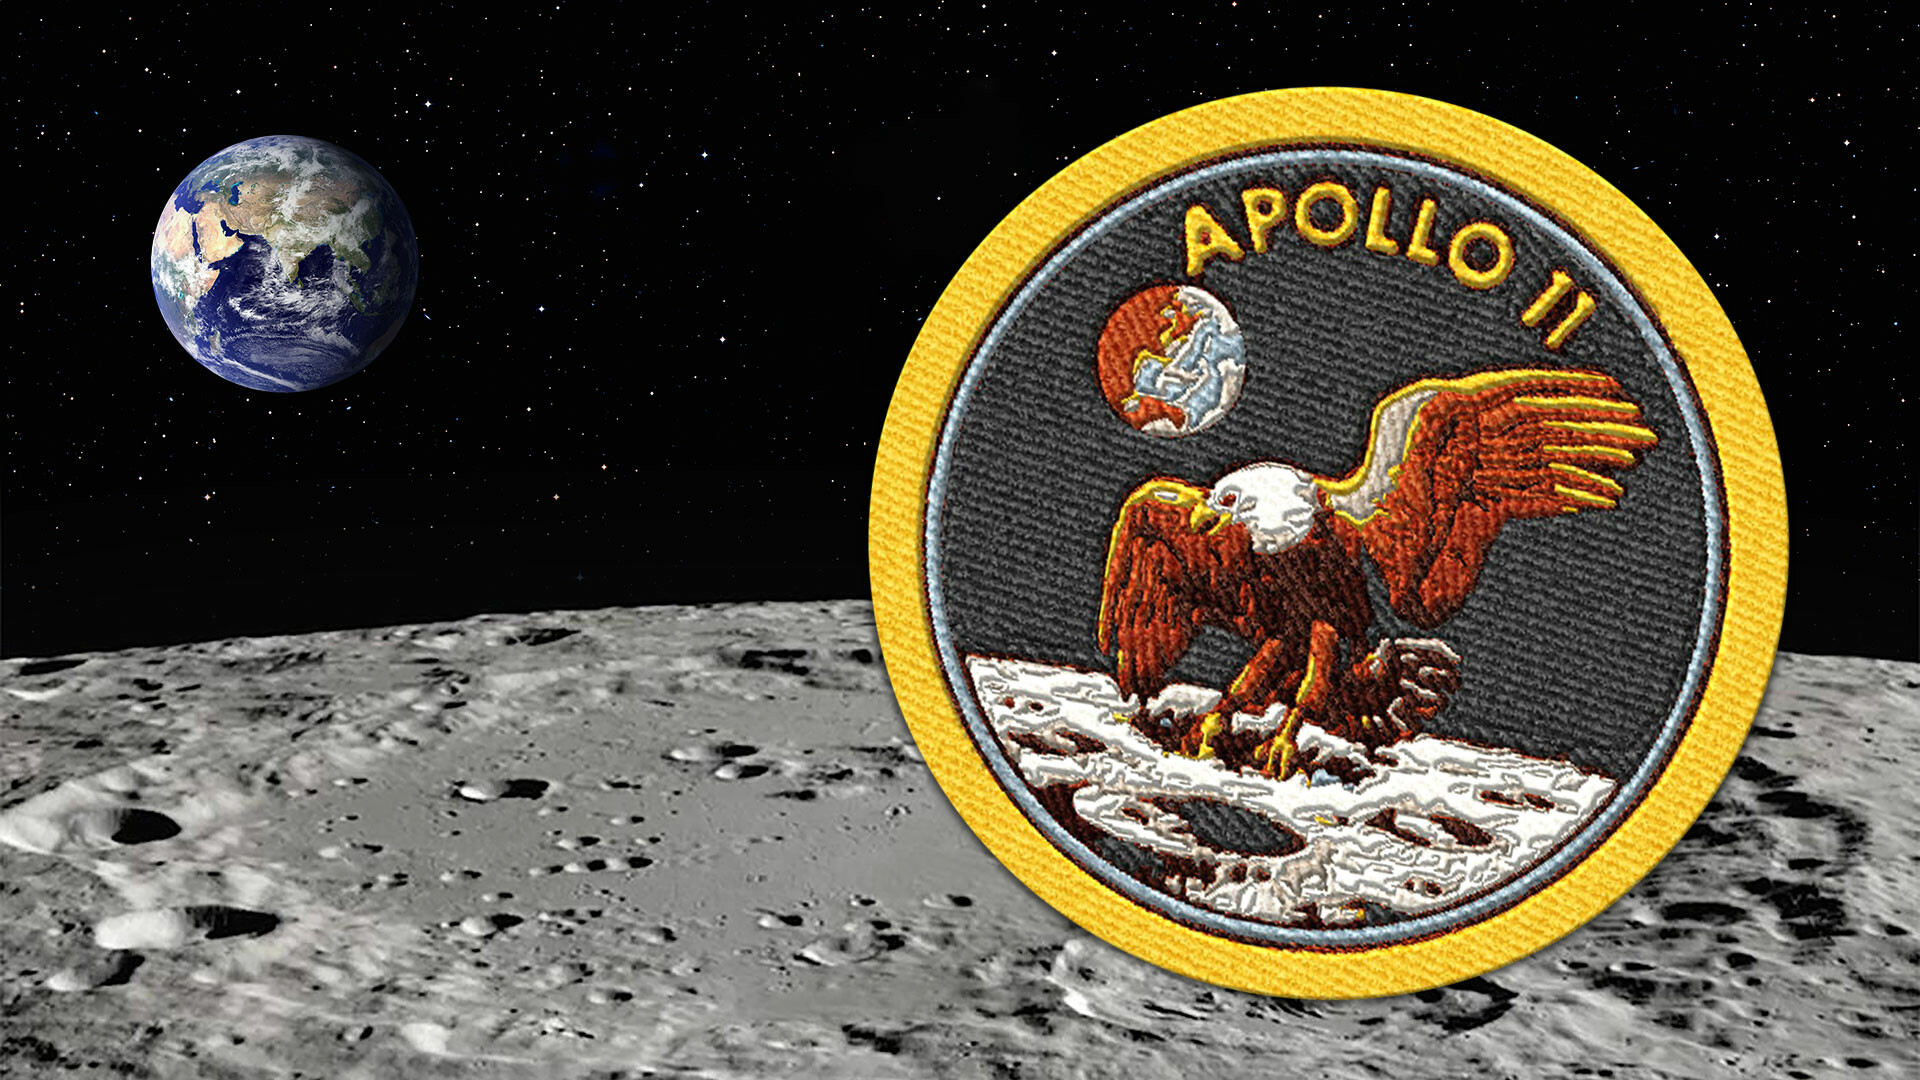 Custom Space Patches are Out of This World